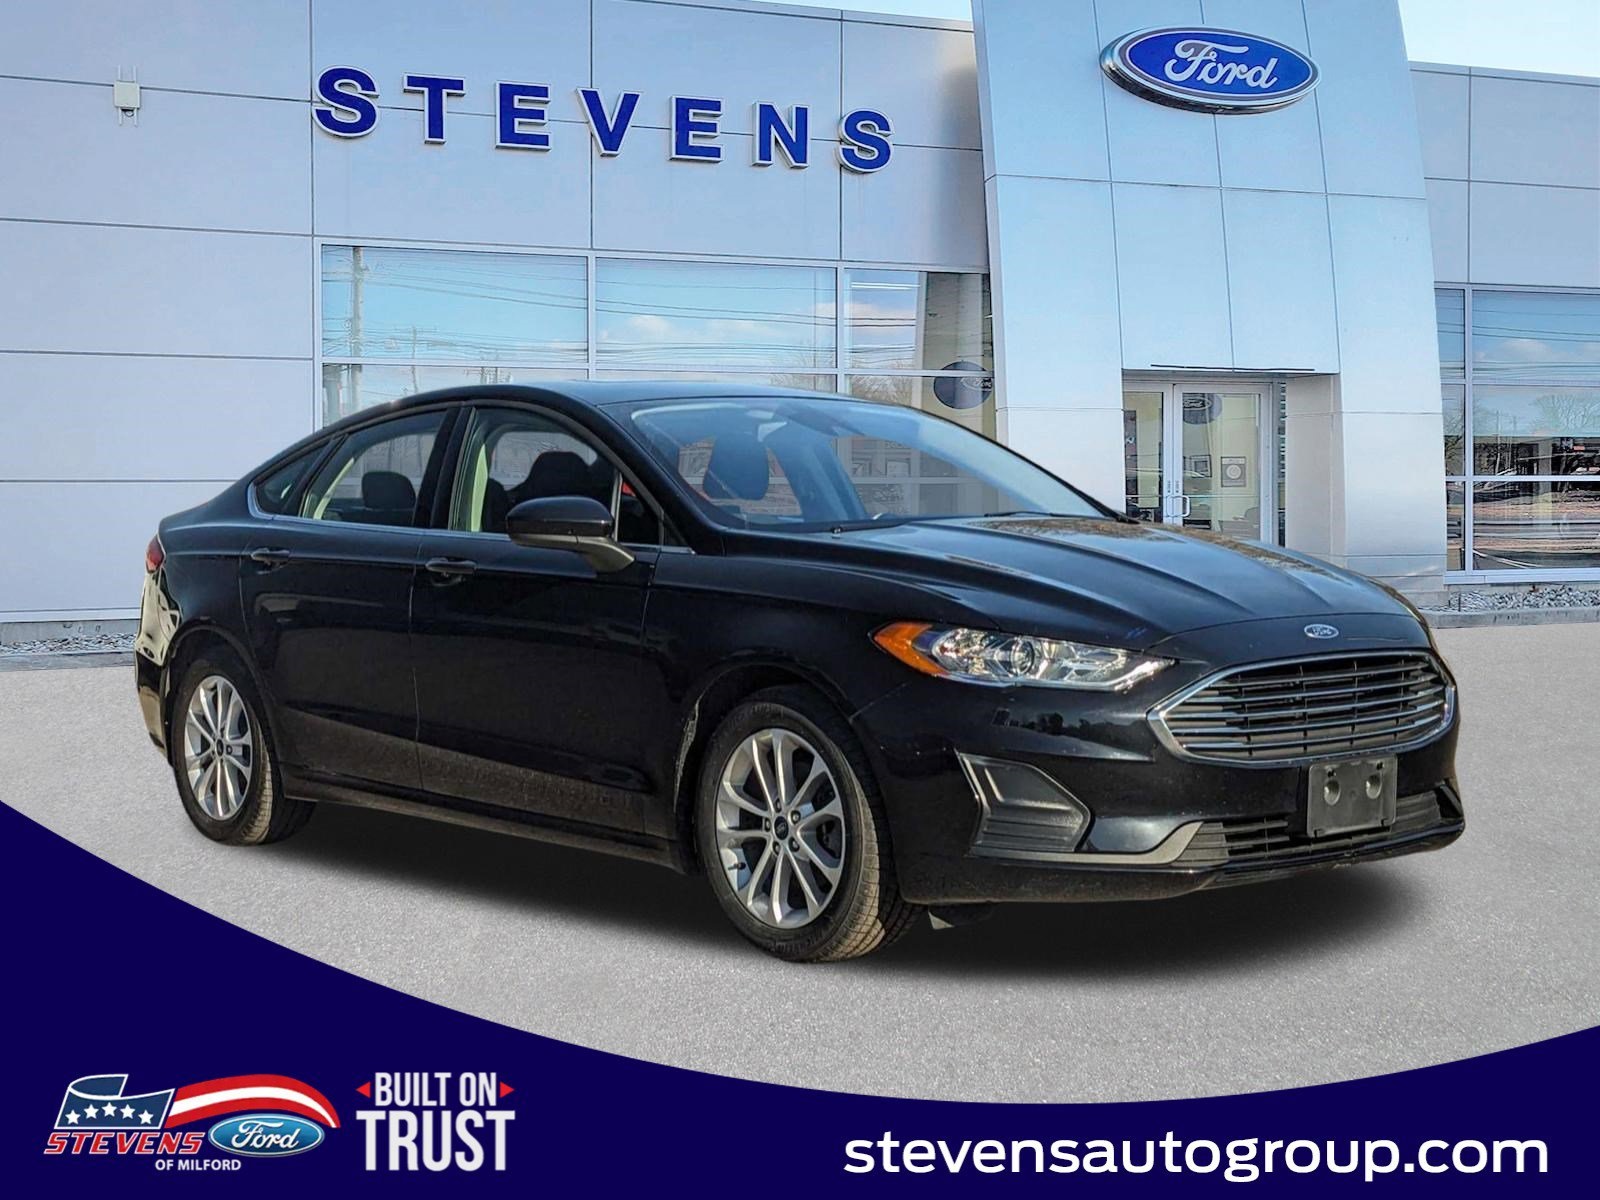 2020 Ford Fusion Milford CT